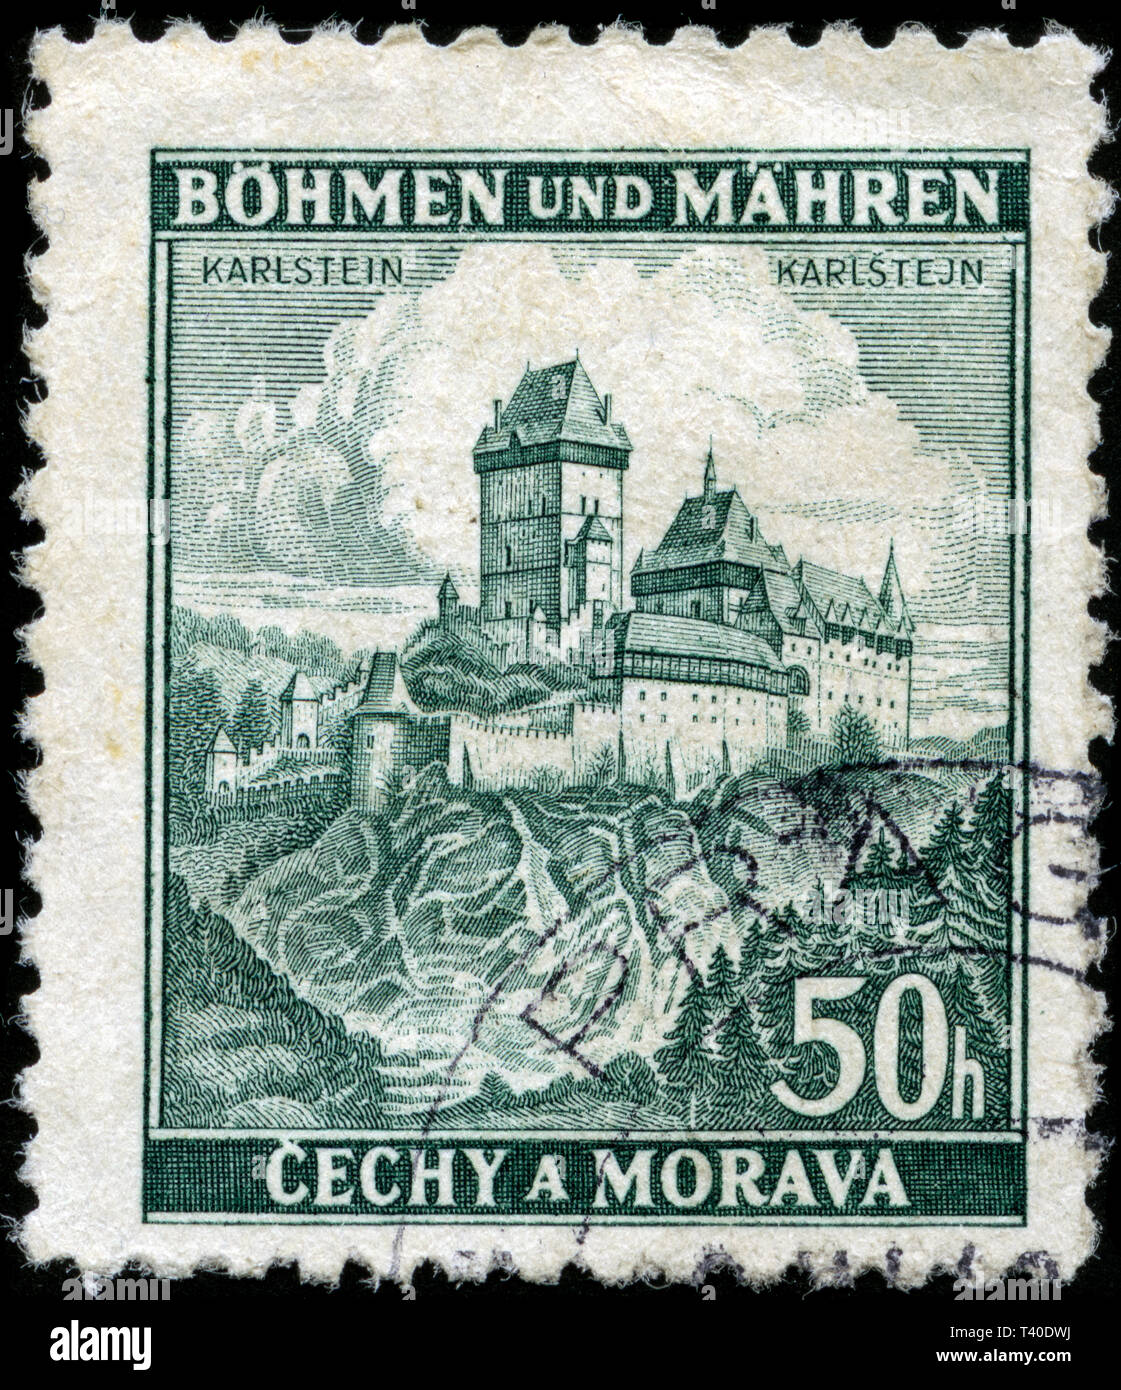 Postage stamp from Bohemia and Moravia in the Landscapes series issued in 1939 Stock Photo